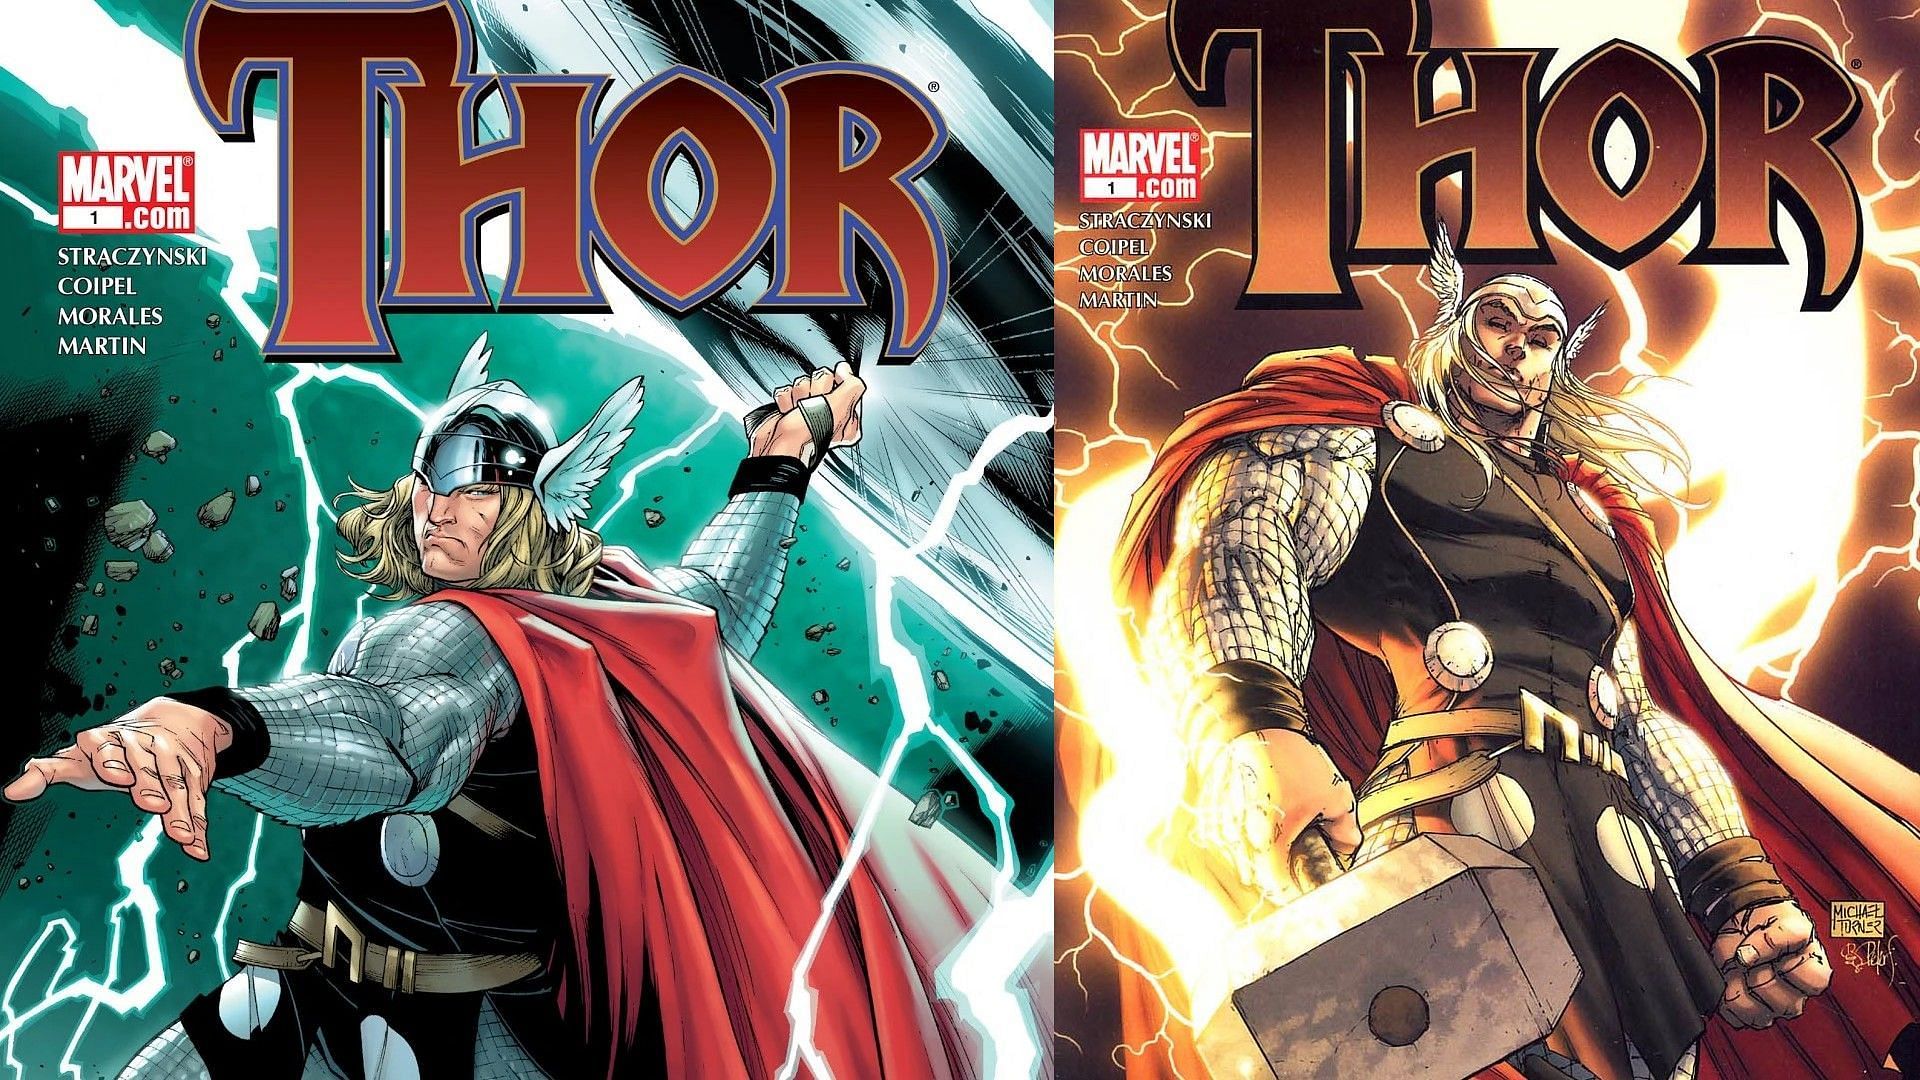 Thor and Iron Man have a rocky start (Image via Marvel Comics)